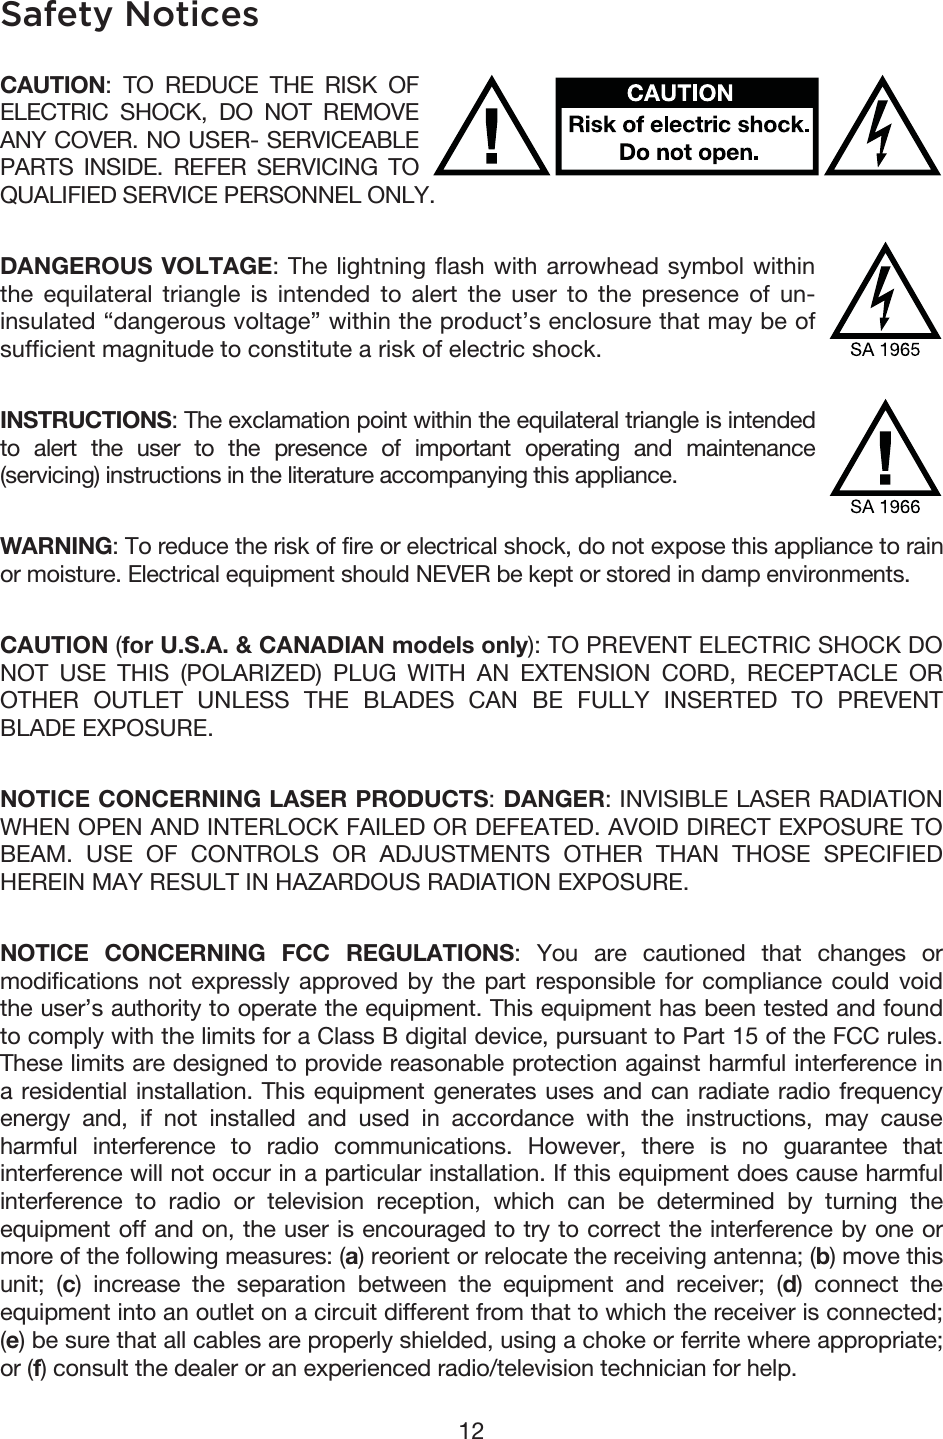 12 Safety Notices CAUTION: TO REDUCE THE RISK OF ELECTRIC SHOCK, DO NOT REMOVE ANY COVER. NO USER- SERVICEABLE PARTS INSIDE. REFER SERVICING TO QUALIFIED SERVICE PERSONNEL ONLY. DANGEROUS VOLTAGE: The lightning flash with arrowhead symbol within the equilateral triangle is intended to alert the user to the presence of un-insulated “dangerous voltage” within the product’s enclosure that may be of sufficient magnitude to constitute a risk of electric shock. INSTRUCTIONS: The exclamation point within the equilateral triangle is intended to alert the user to the presence of important operating and maintenance (servicing) instructions in the literature accompanying this appliance. WARNING: To reduce the risk of fire or electrical shock, do not expose this appliance to rain or moisture. Electrical equipment should NEVER be kept or stored in damp environments. CAUTION (for U.S.A. &amp; CANADIAN models only): TO PREVENT ELECTRIC SHOCK DO NOT USE THIS (POLARIZED) PLUG WITH AN EXTENSION CORD, RECEPTACLE OR OTHER OUTLET UNLESS THE BLADES CAN BE FULLY INSERTED TO PREVENT BLADE EXPOSURE. NOTICE CONCERNING LASER PRODUCTS: DANGER: INVISIBLE LASER RADIATION WHEN OPEN AND INTERLOCK FAILED OR DEFEATED. AVOID DIRECT EXPOSURE TO BEAM. USE OF CONTROLS OR ADJUSTMENTS OTHER THAN THOSE SPECIFIED HEREIN MAY RESULT IN HAZARDOUS RADIATION EXPOSURE. NOTICE CONCERNING FCC REGULATIONS: You are cautioned that changes or modifications not expressly approved by the part responsible for compliance could void the user’s authority to operate the equipment. This equipment has been tested and found to comply with the limits for a Class B digital device, pursuant to Part 15 of the FCC rules. These limits are designed to provide reasonable protection against harmful interference in a residential installation. This equipment generates uses and can radiate radio frequency energy and, if not installed and used in accordance with the instructions, may cause harmful interference to radio communications. However, there is no guarantee that interference will not occur in a particular installation. If this equipment does cause harmful interference to radio or television reception, which can be determined by turning the equipment off and on, the user is encouraged to try to correct the interference by one or more of the following measures: (a) reorient or relocate the receiving antenna; (b) move this unit; (c) increase the separation between the equipment and receiver; (d) connect the equipment into an outlet on a circuit different from that to which the receiver is connected; (e) be sure that all cables are properly shielded, using a choke or ferrite where appropriate; or (f) consult the dealer or an experienced radio/television technician for help. 